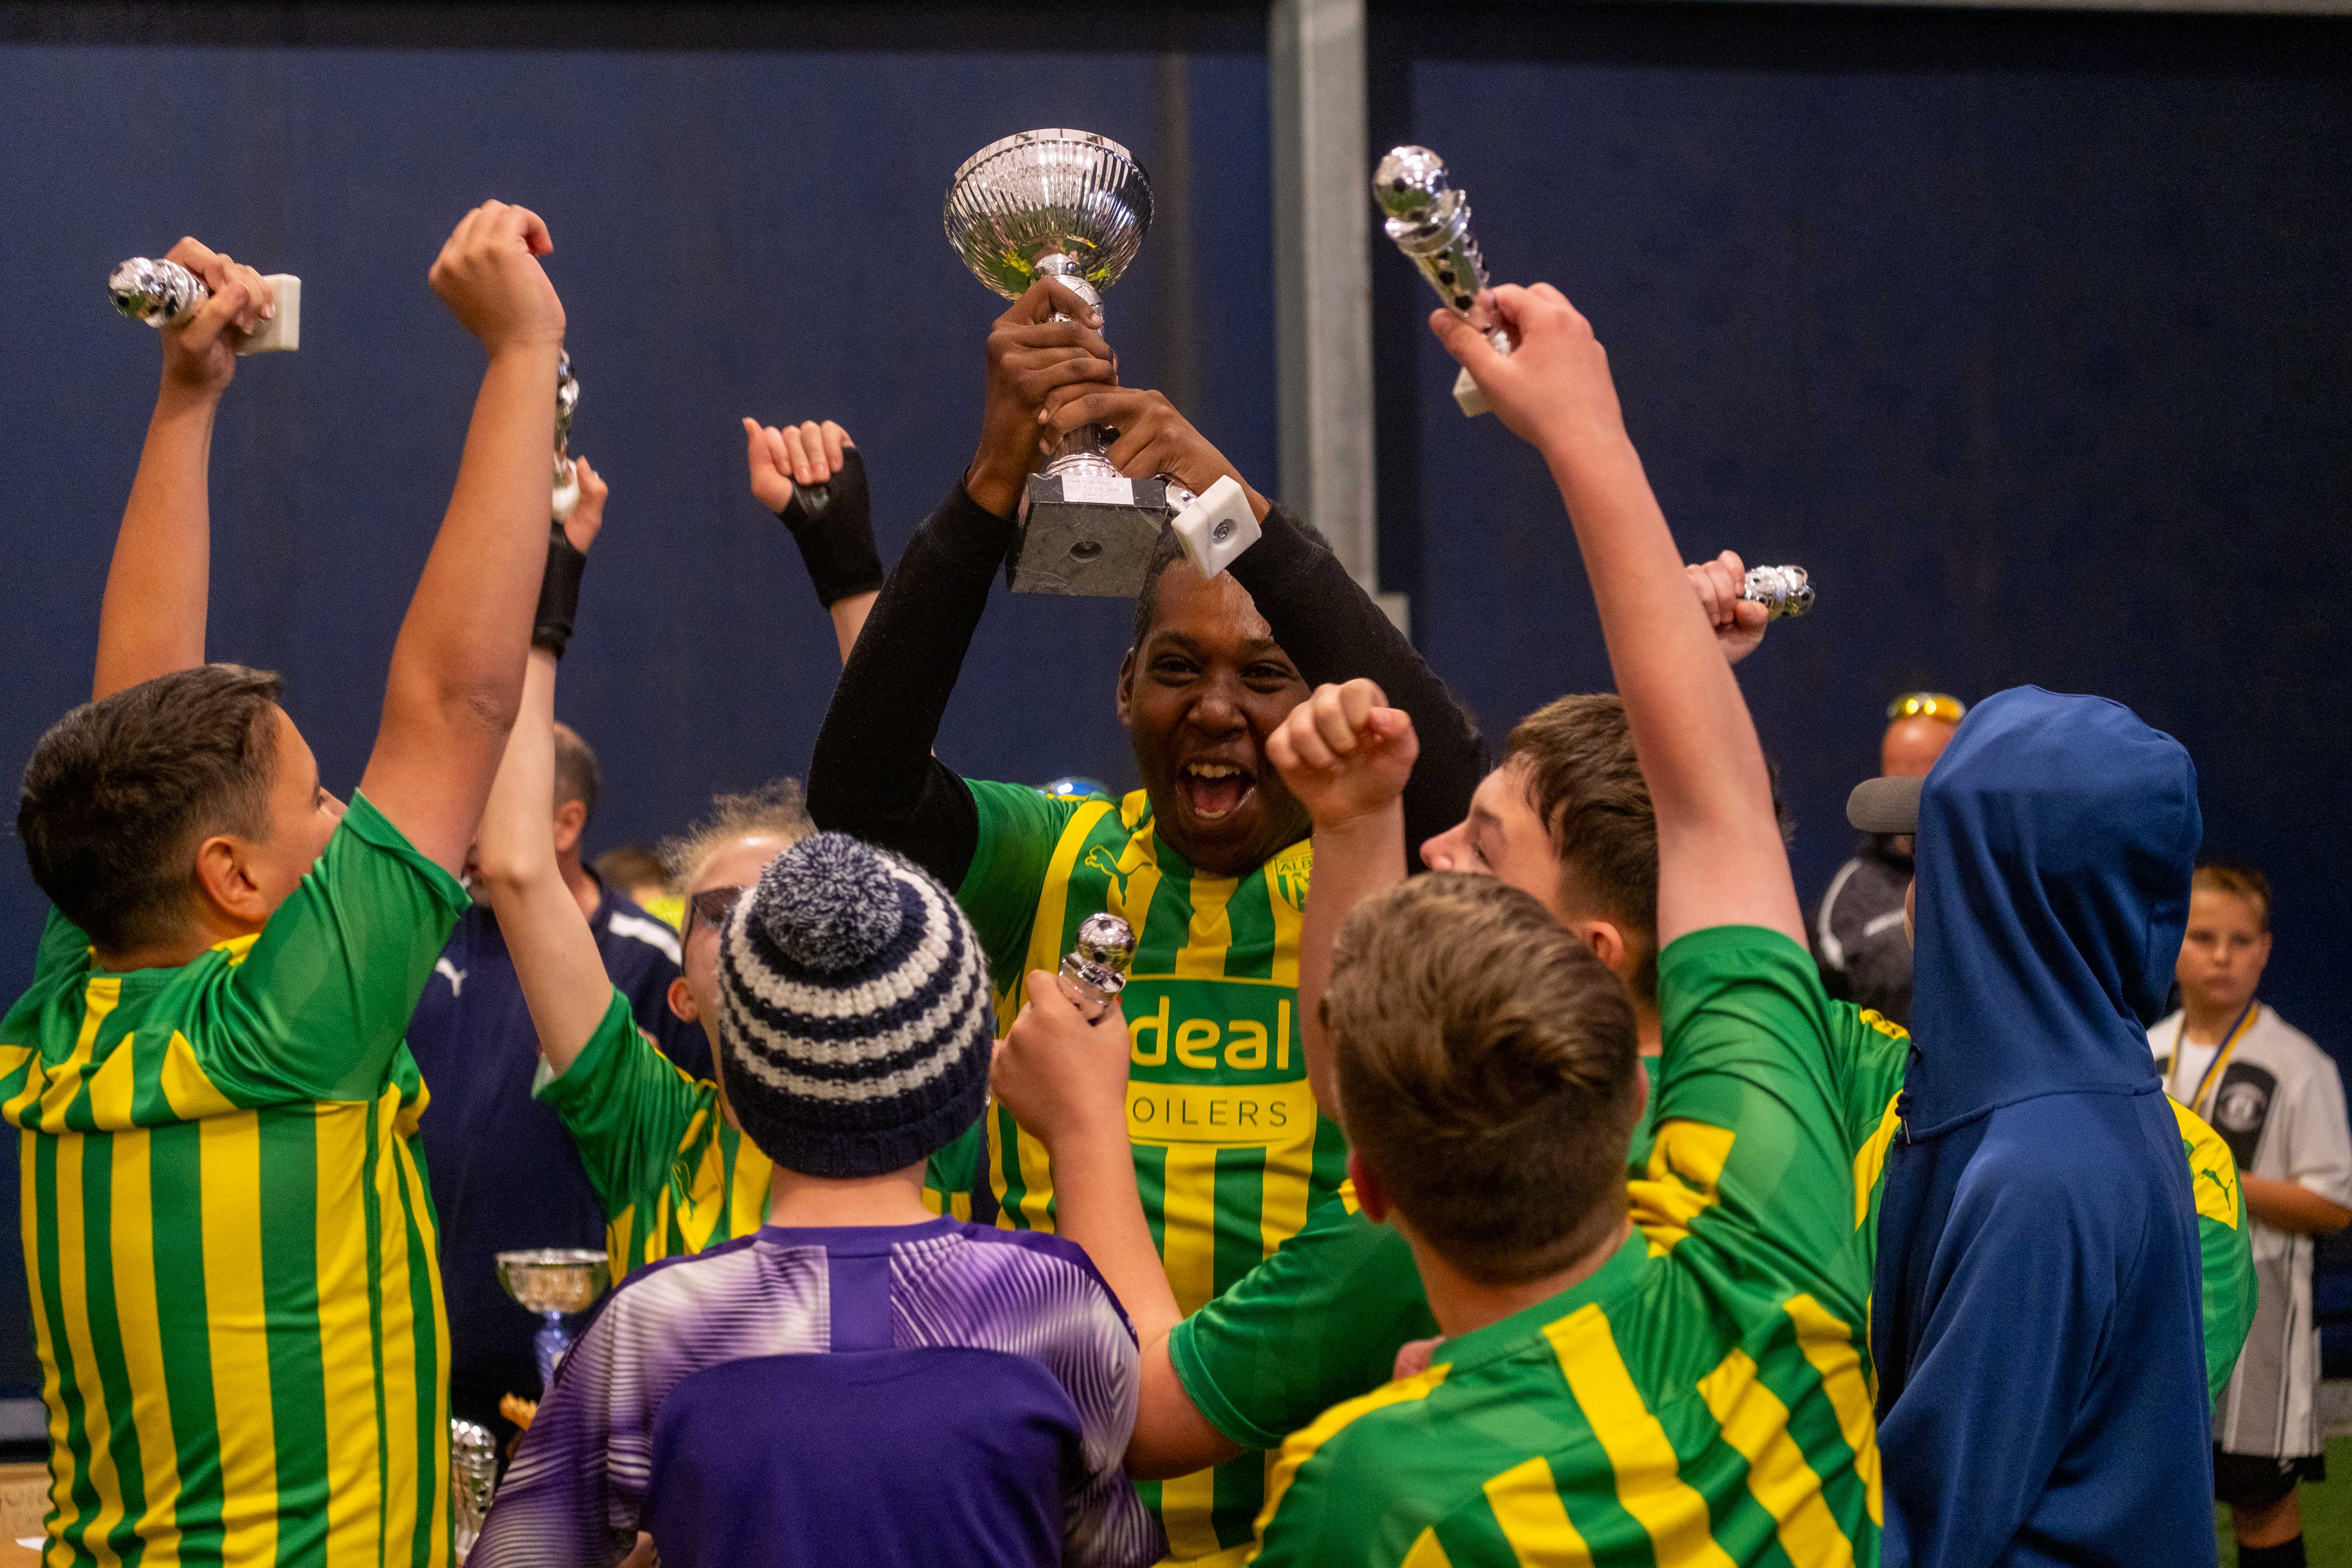 A group of Albion players lift one of the Sandwell Inclusion Cup trophies wearing the Baggies' 2019/20 green and yellow away shirt.